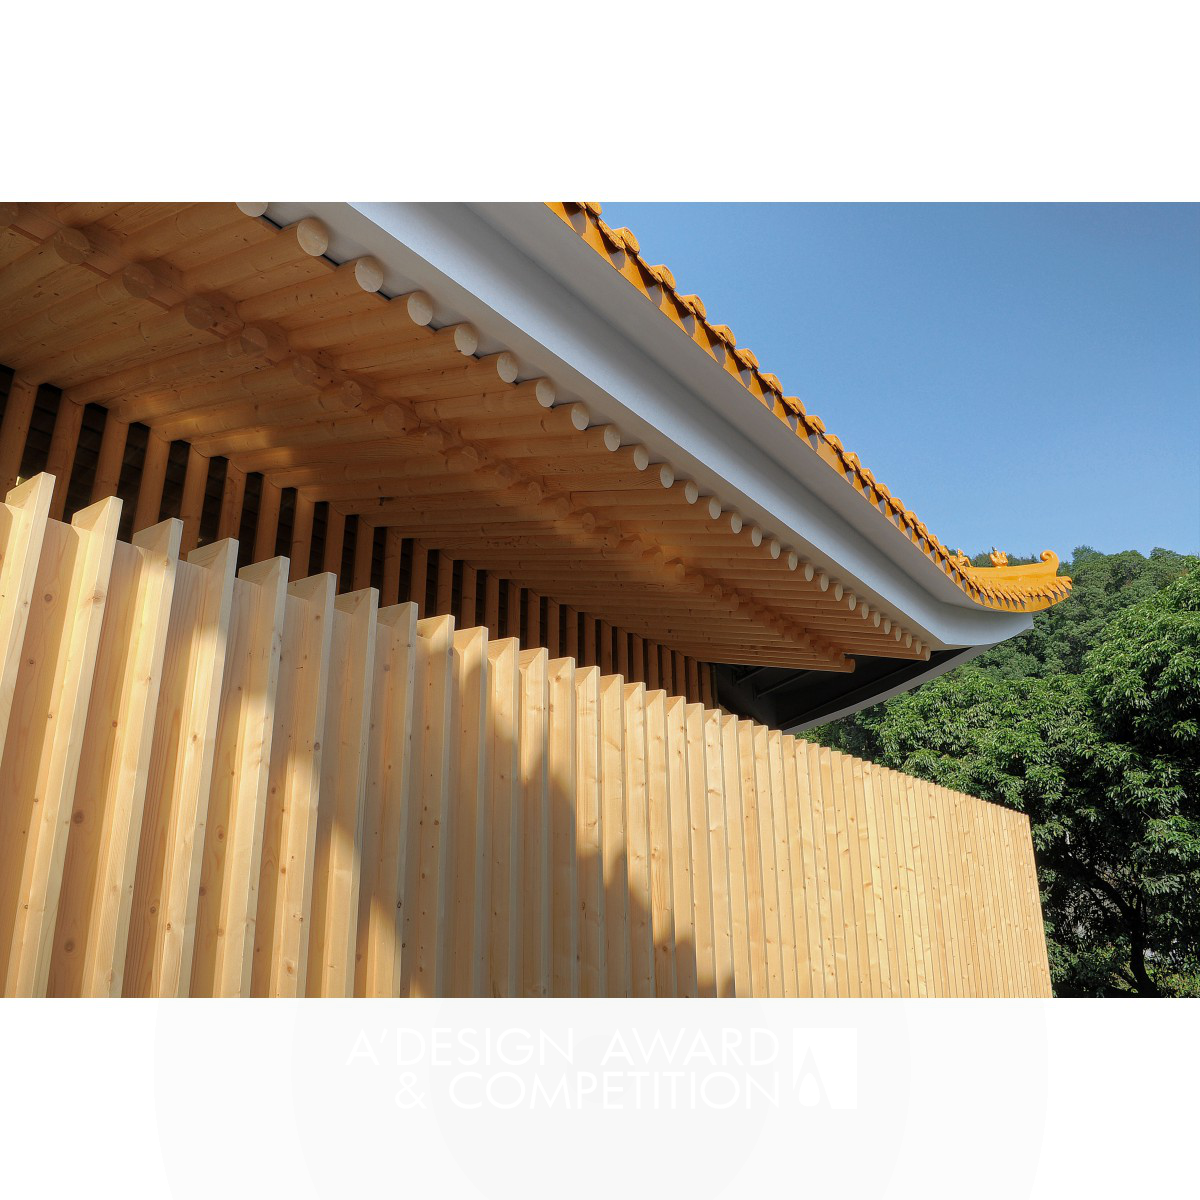 Timber tale An ancestor hall by Eureka Limited